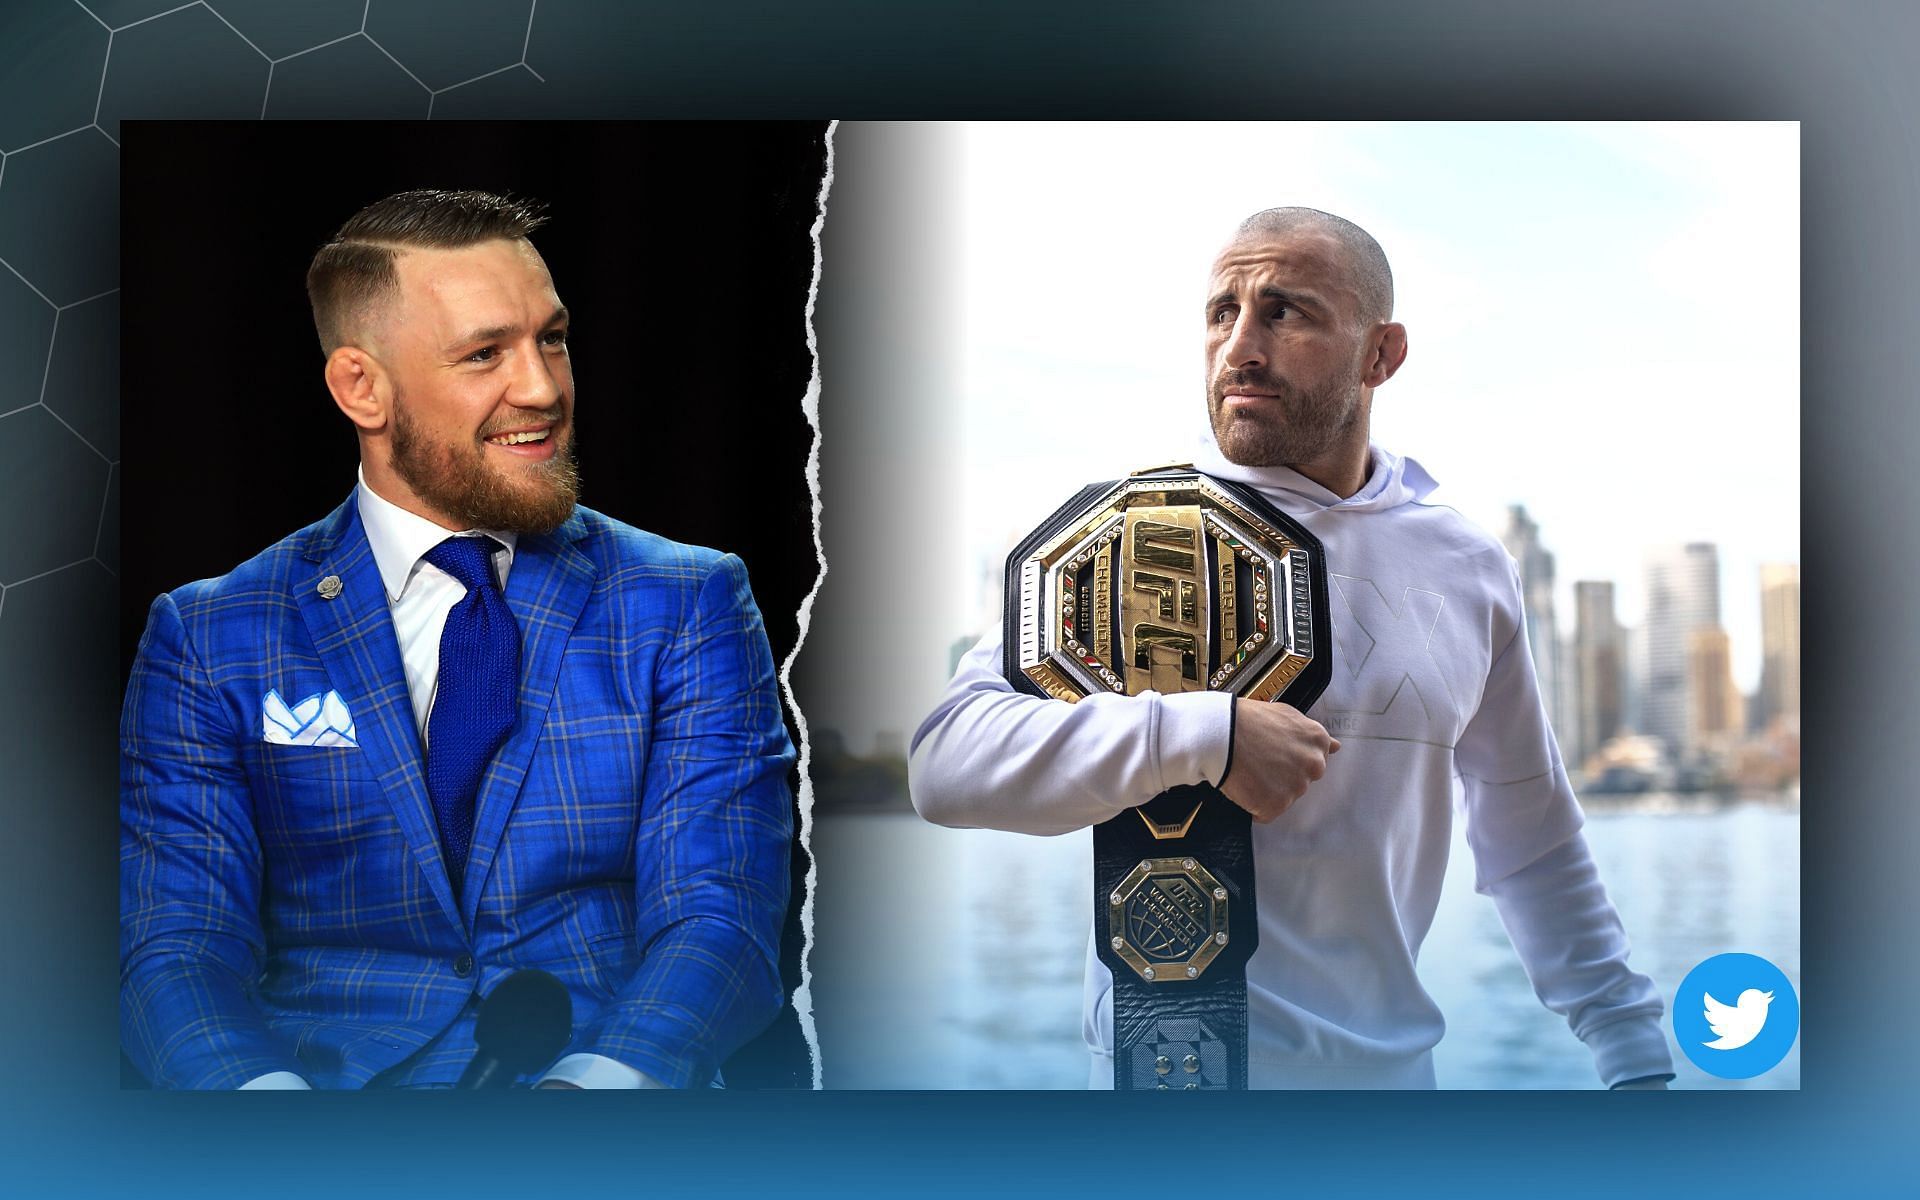 Conor McGregor and Alexander Volkanovski goes back and forth for a potential matchup.